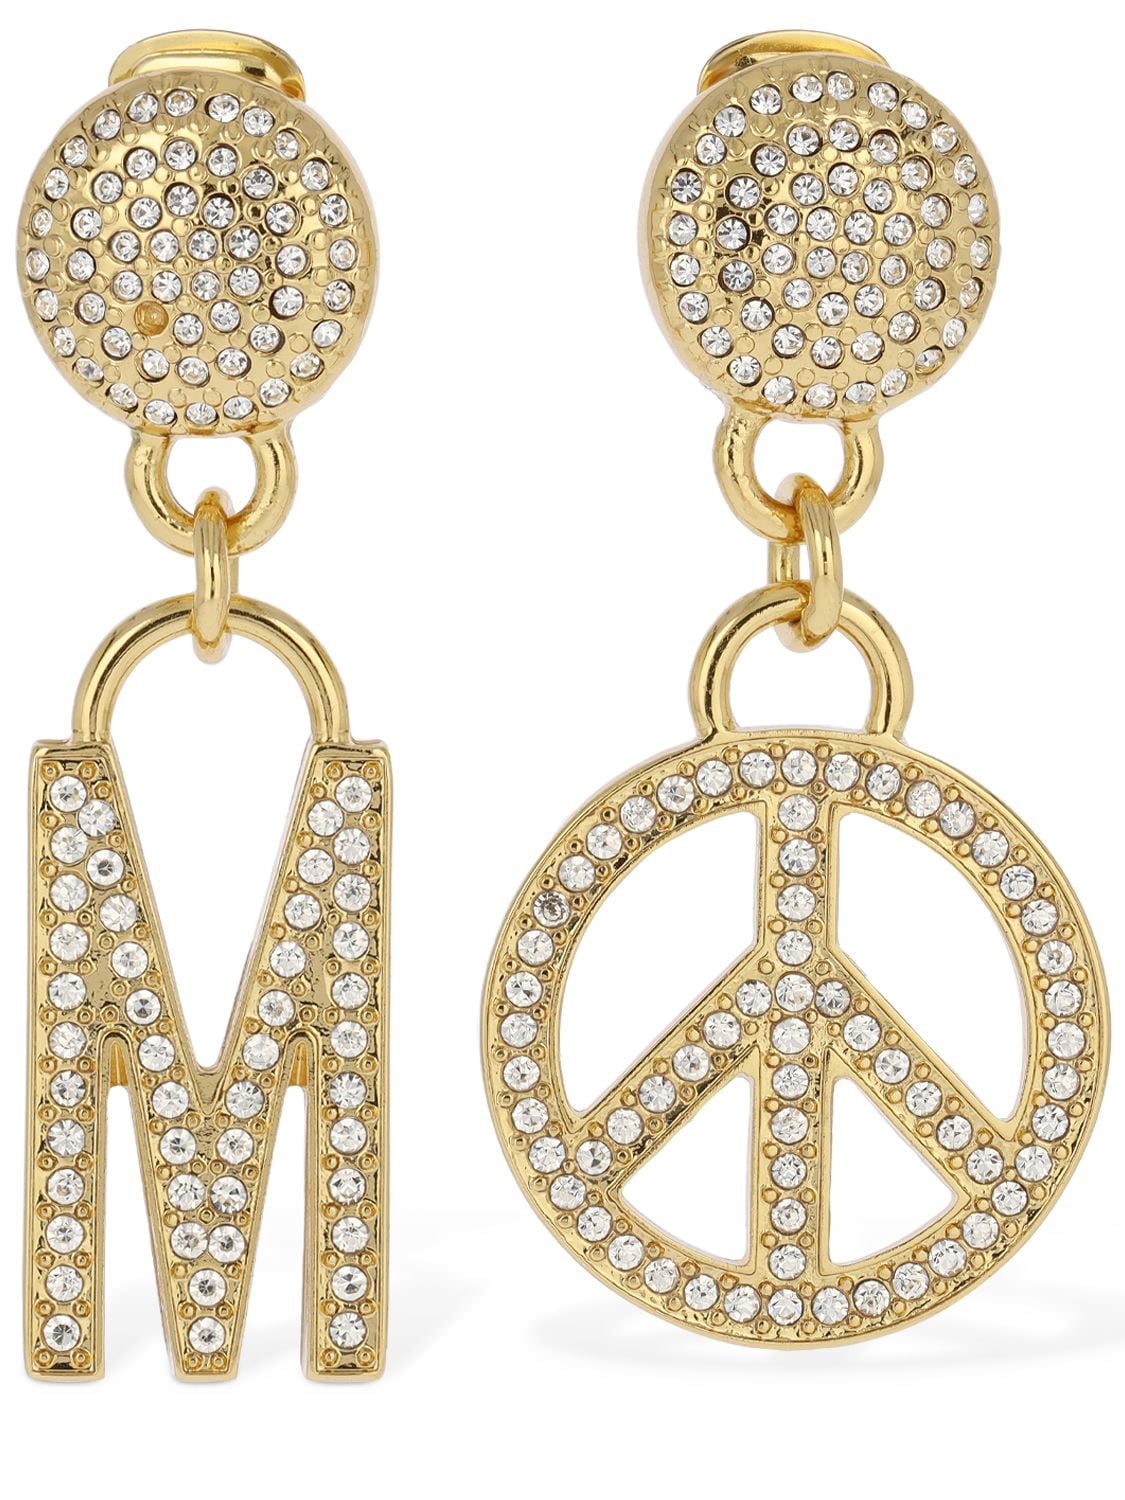 Moschino Crystal Mismatched Earrings – WOMEN > JEWELRY & WATCHES > EARRINGS